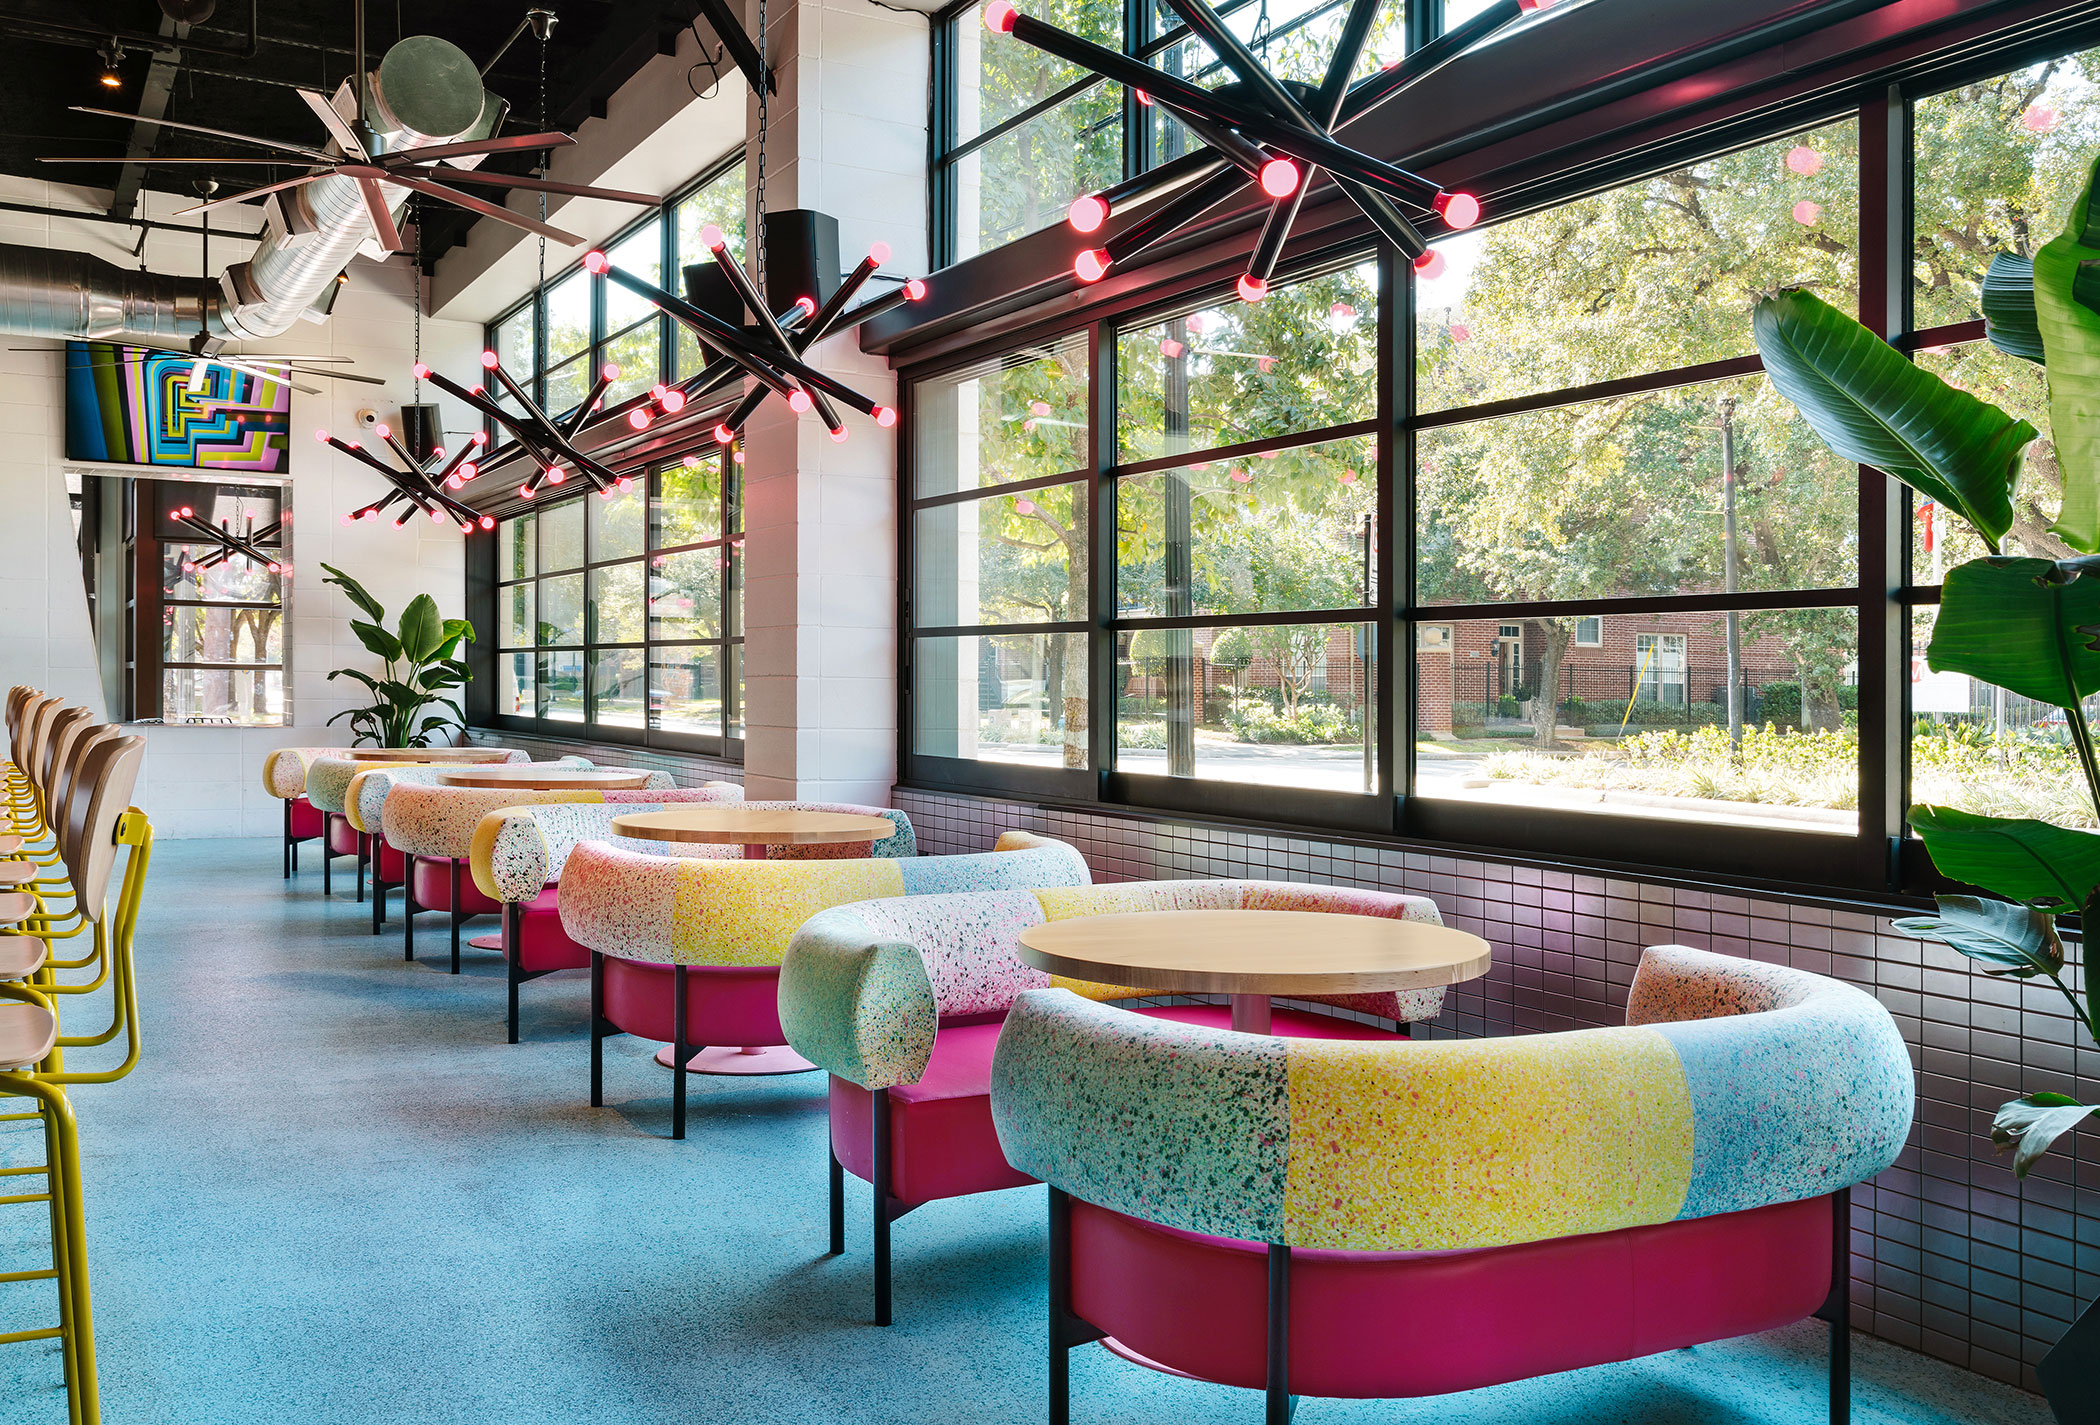 Sets of colorful sofa seating around a hand full of tables lining windows at a restaurant, modern chandelier lighting overhead.